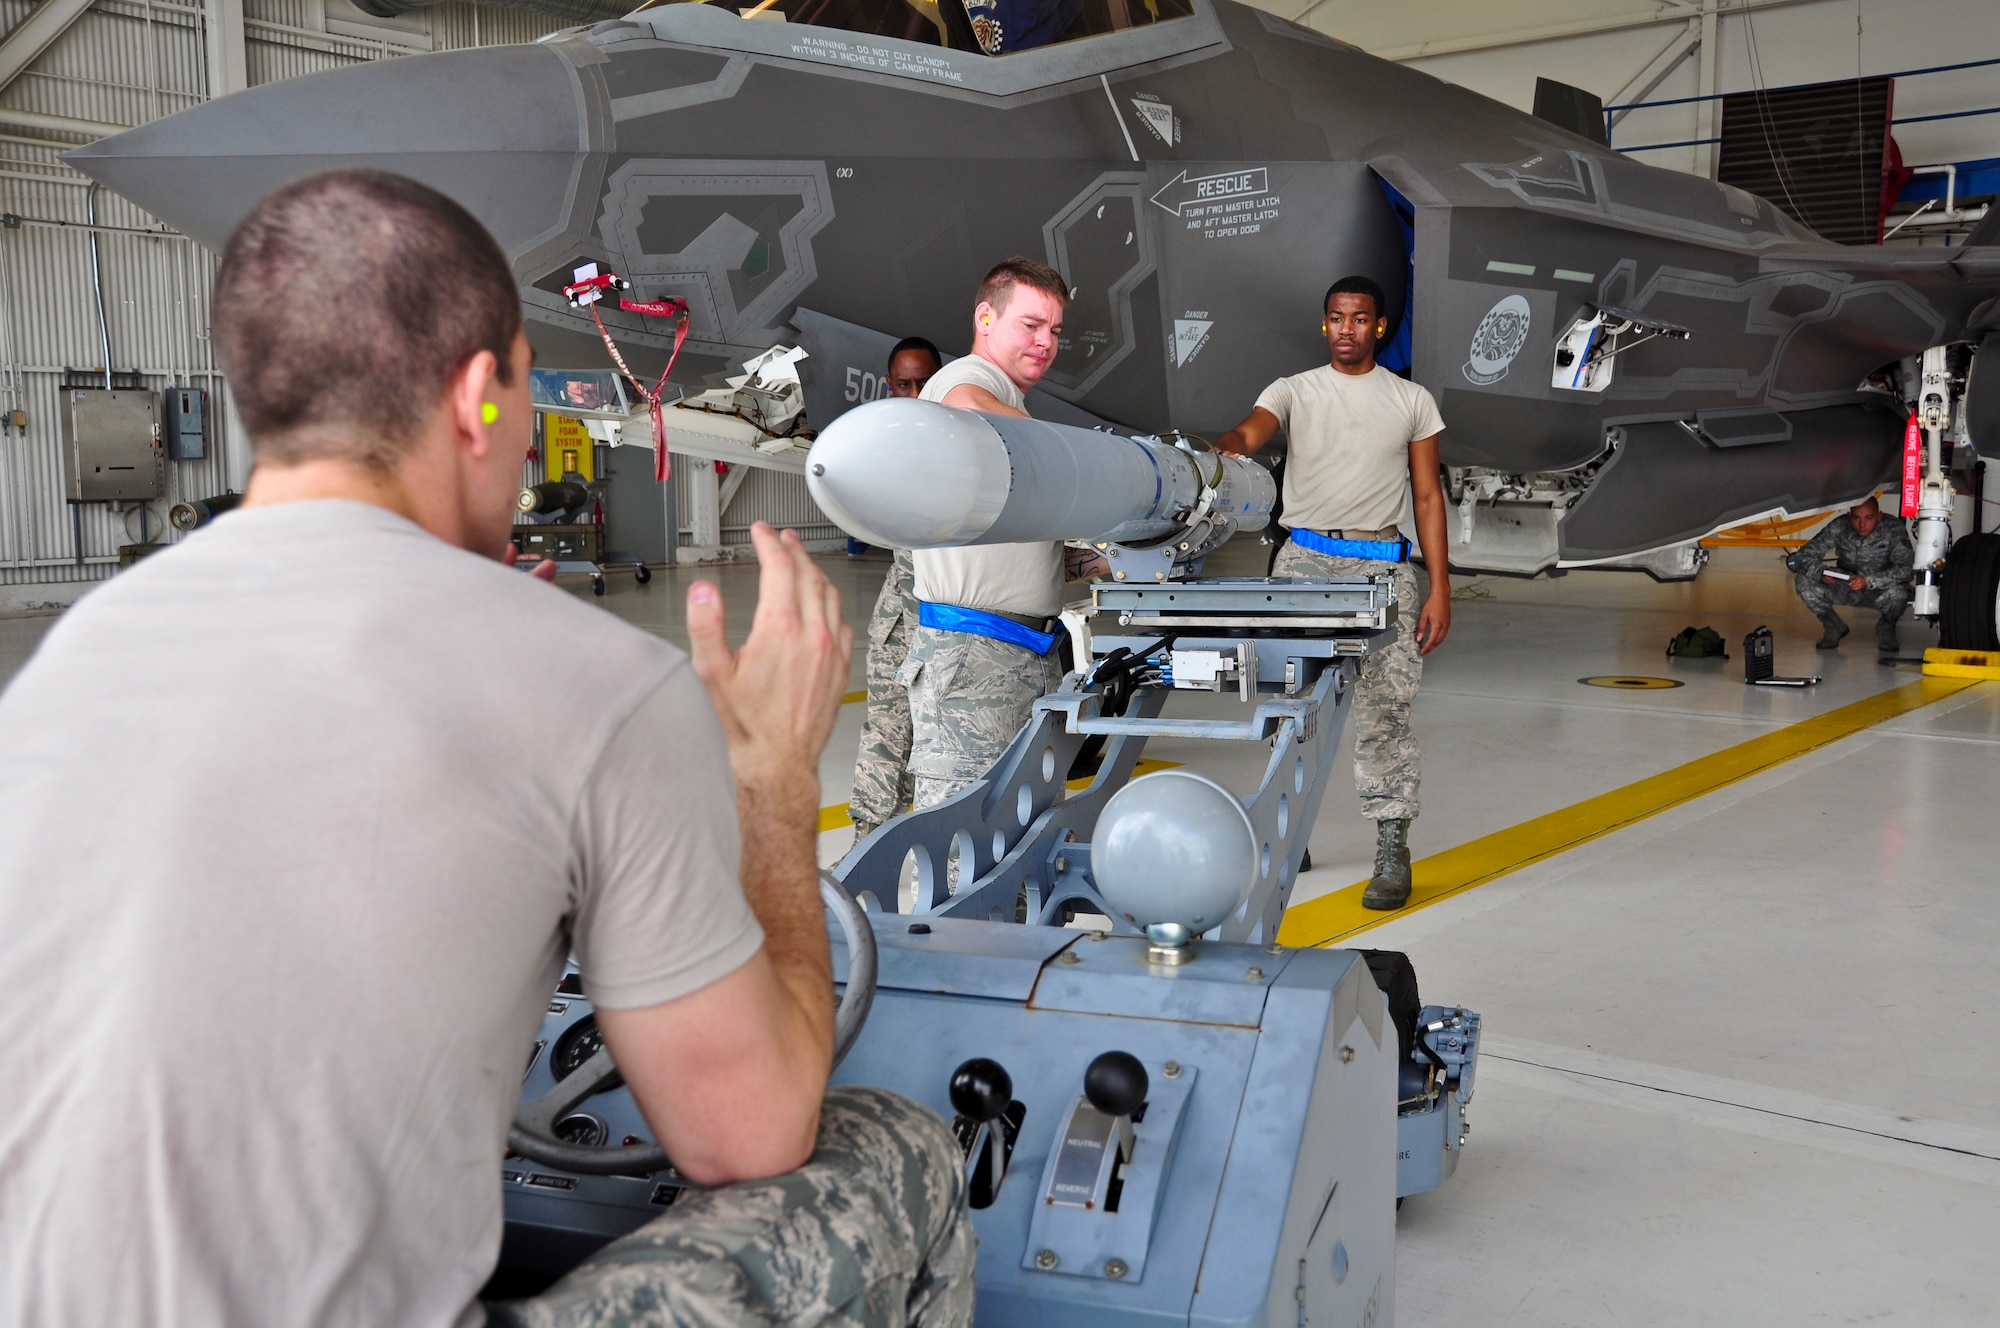 Airman 1st Class Reece Zoller, left, operates an MJ-1 lift truck carrying an AIM-120 advanced medium-range air-to-air missile as Staff Sgt. Zachary Watts, center, and Airman 1st Class Robert Hughes, right, guide him during a qualification load Oct. 10, 2014, at Eglin Air Force Base, Fla. The F-35 training program at Eglin AFB currently serves as the primary source of F-35 expertise to new F-35A units across the Air Force. Zoller, Watts and Hughes are load crewmembers from the 58th Aircraft Maintenance Unit crew one. (U.S. Air Force photo/Staff Sgt. Marleah Robertson)